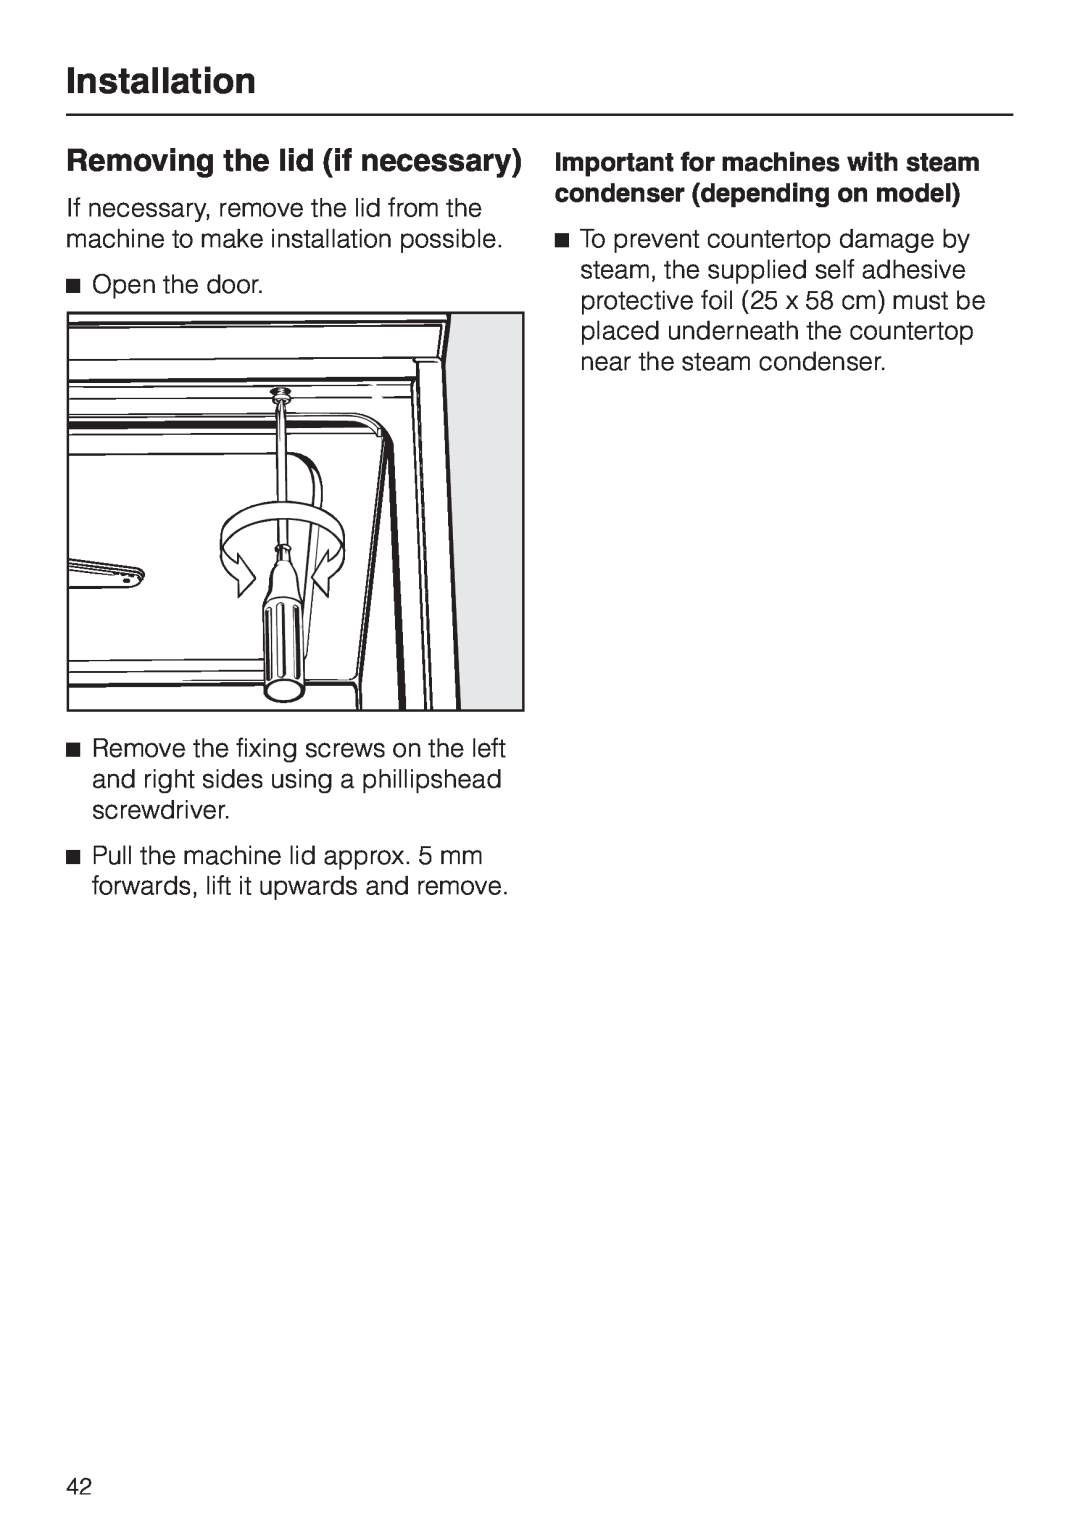 Miele G 7804 operating instructions Removing the lid if necessary, Installation, Open the door 